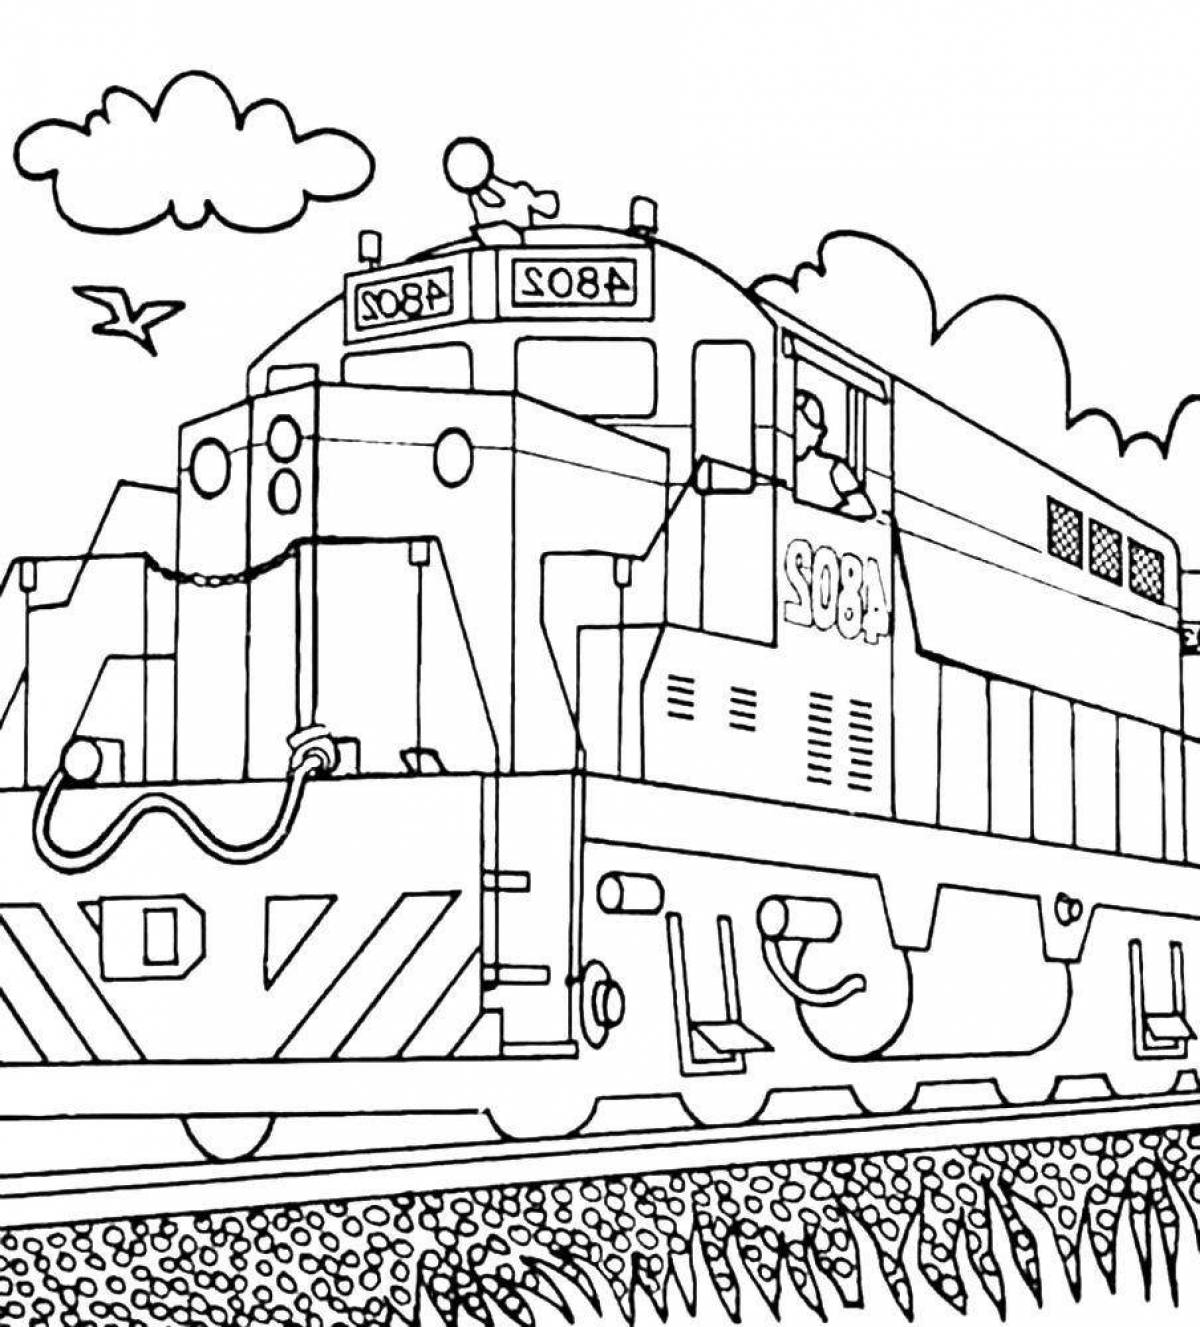 Amazing train coloring page for 5-6 year olds